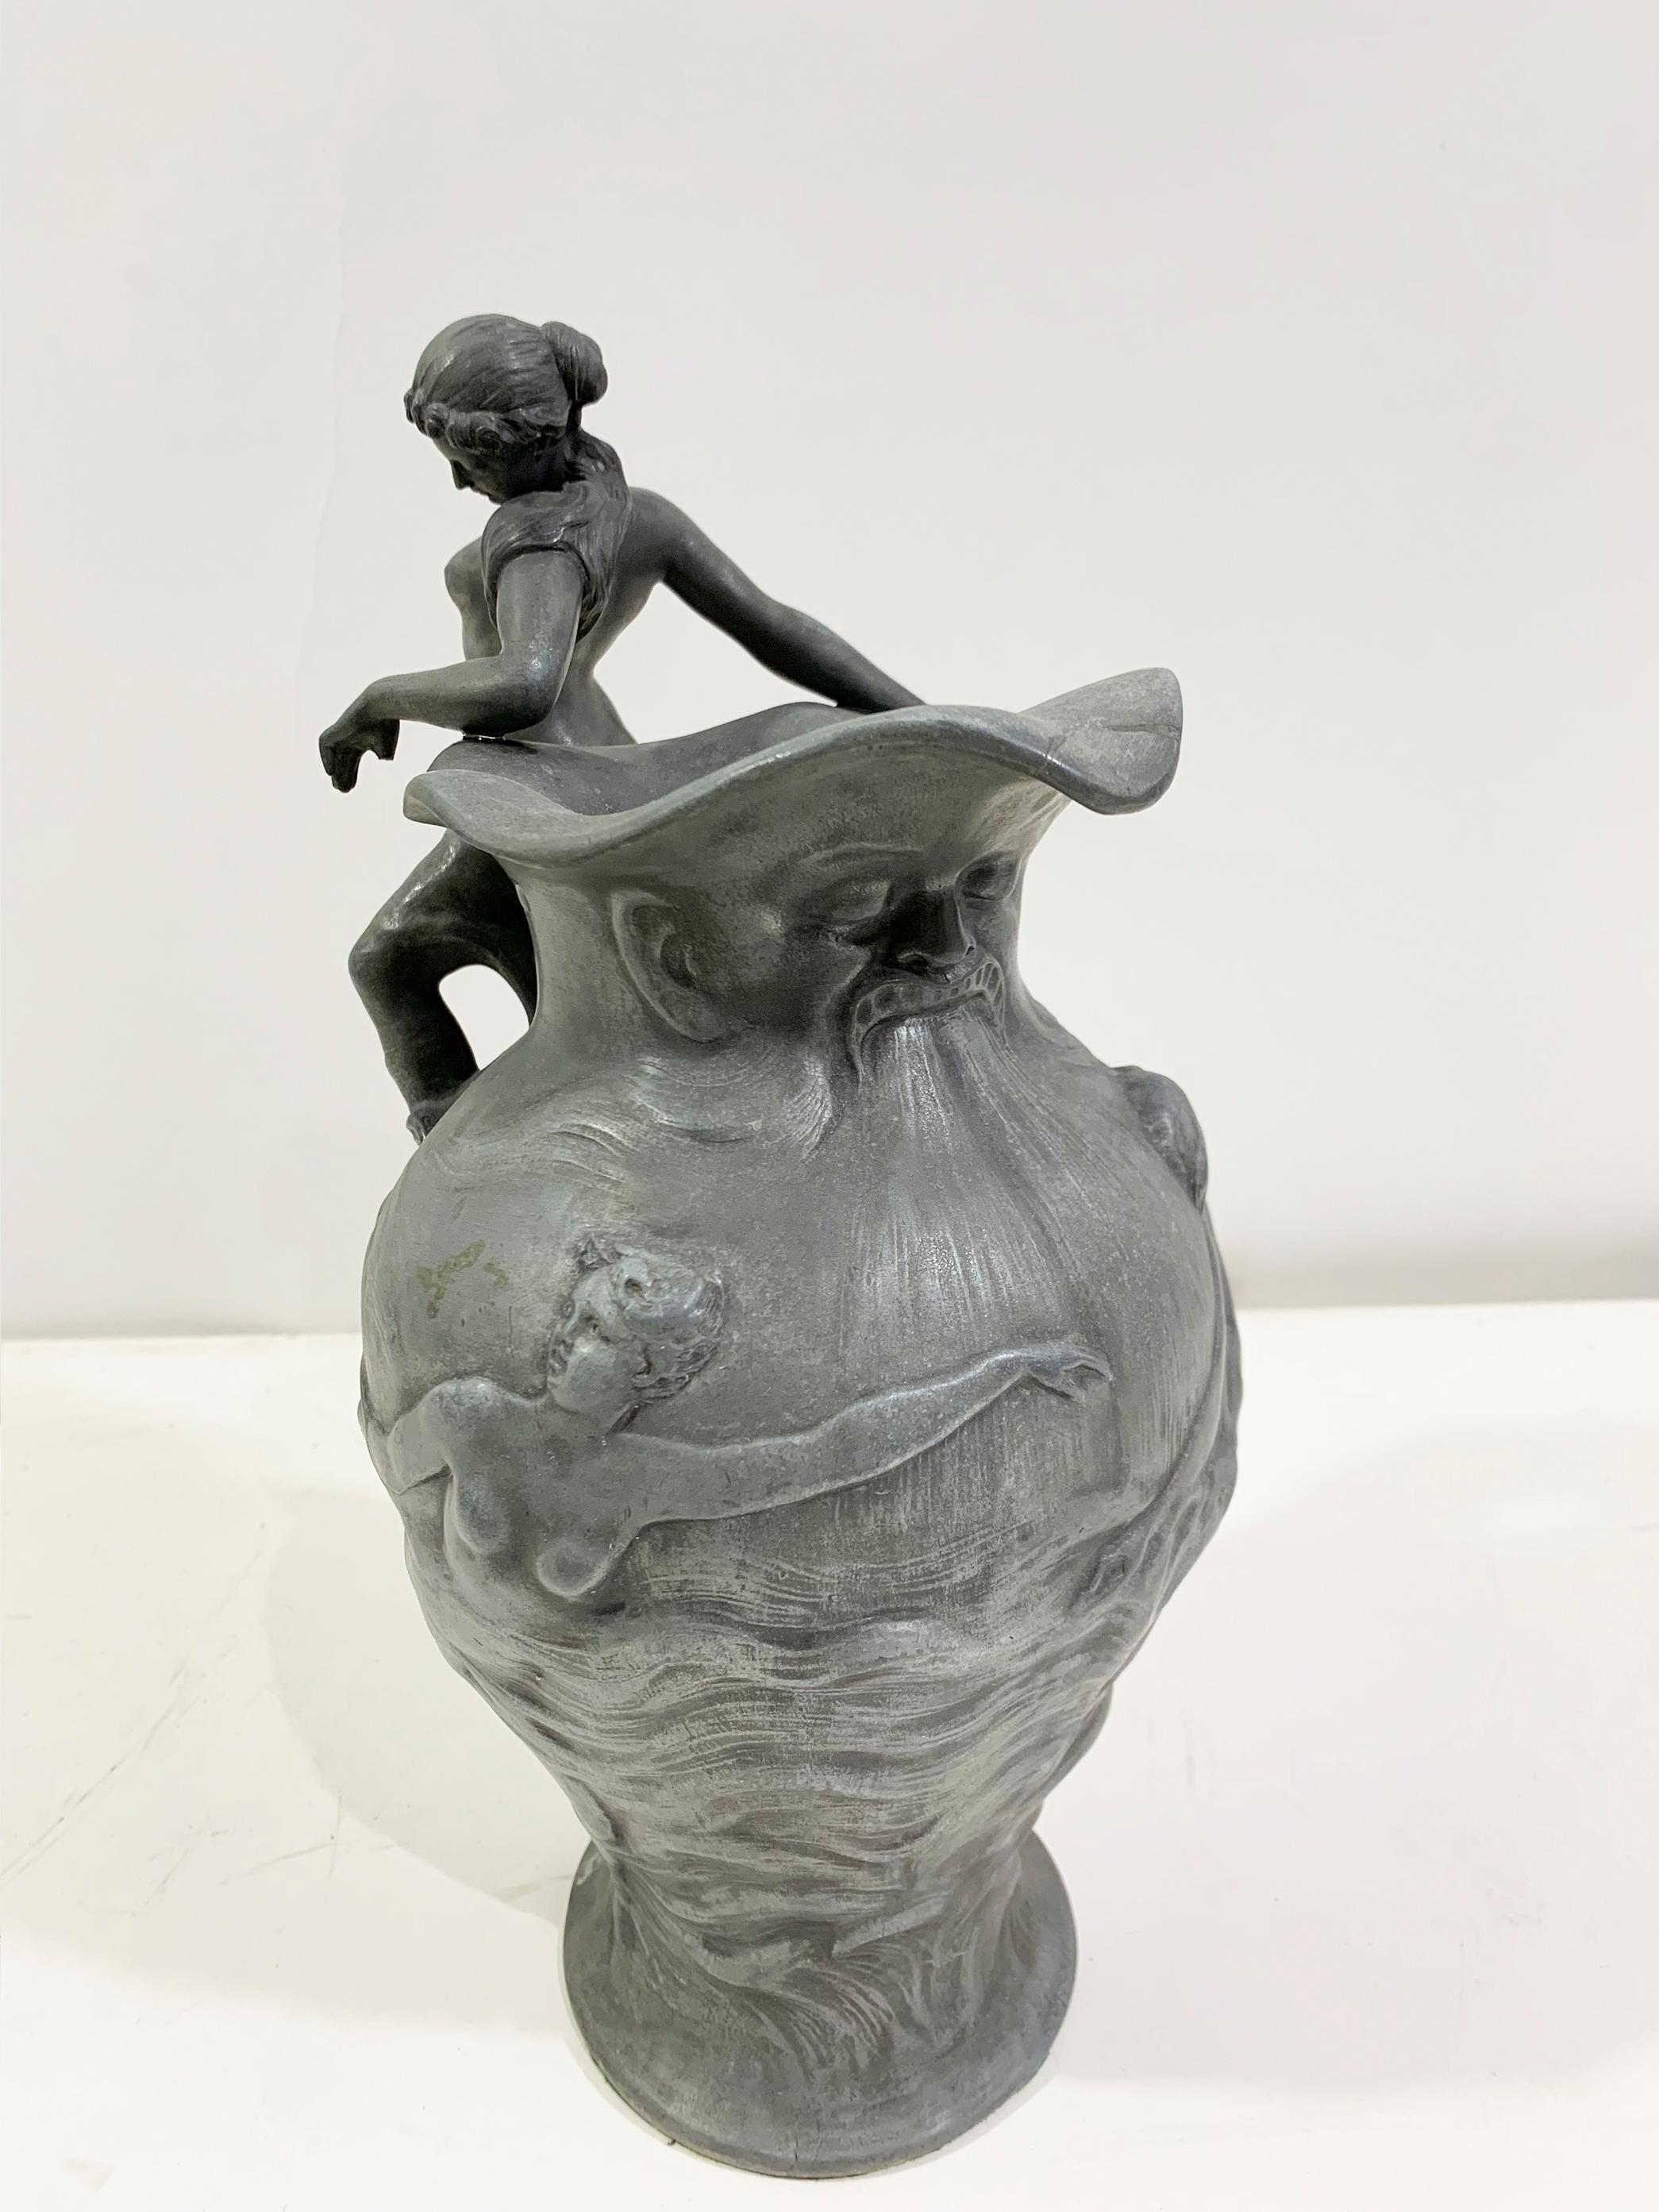 The Art Nouveau sculptural pitcher by sculptor Charles Théodore Perron (1862-1934) is a testament to the elegance of Art Nouveau craftsmanship.

Crafted in France around 1900's, this pewter showcases Perron's keen eye for detail and artistic flair.